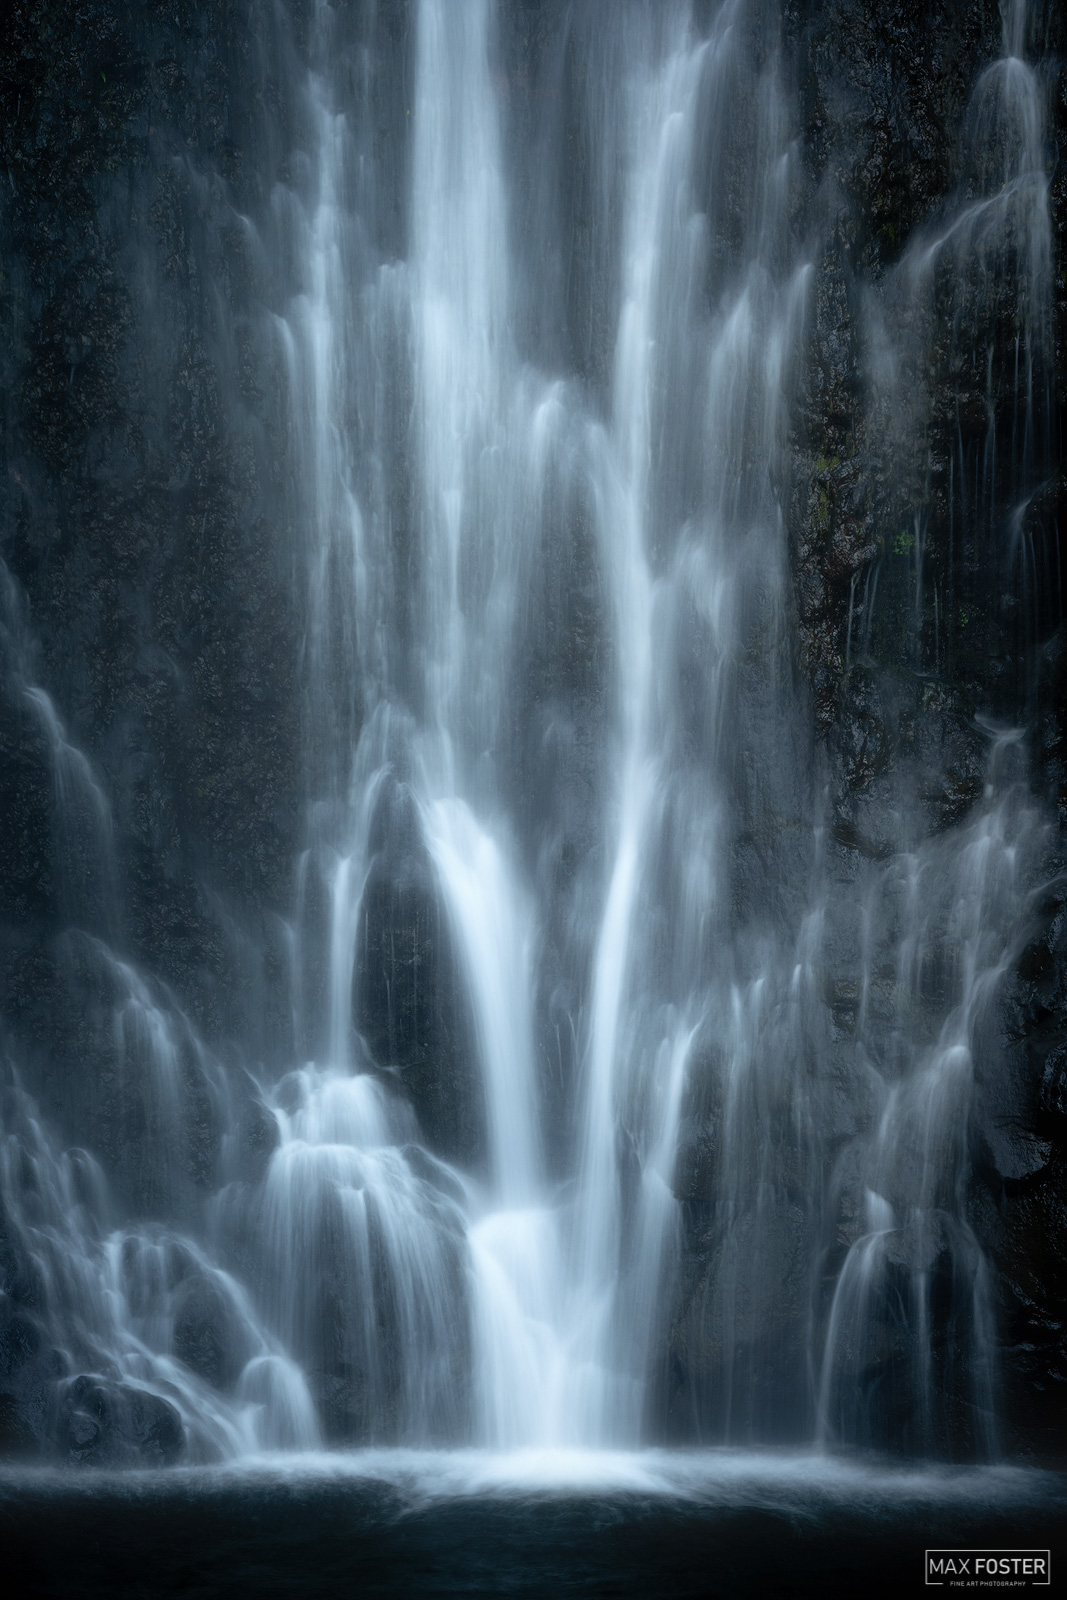 Elevate your space with Transcendence, Max Foster's limited edition photography print of Wailua Falls, Maui from his Hawaii gallery...